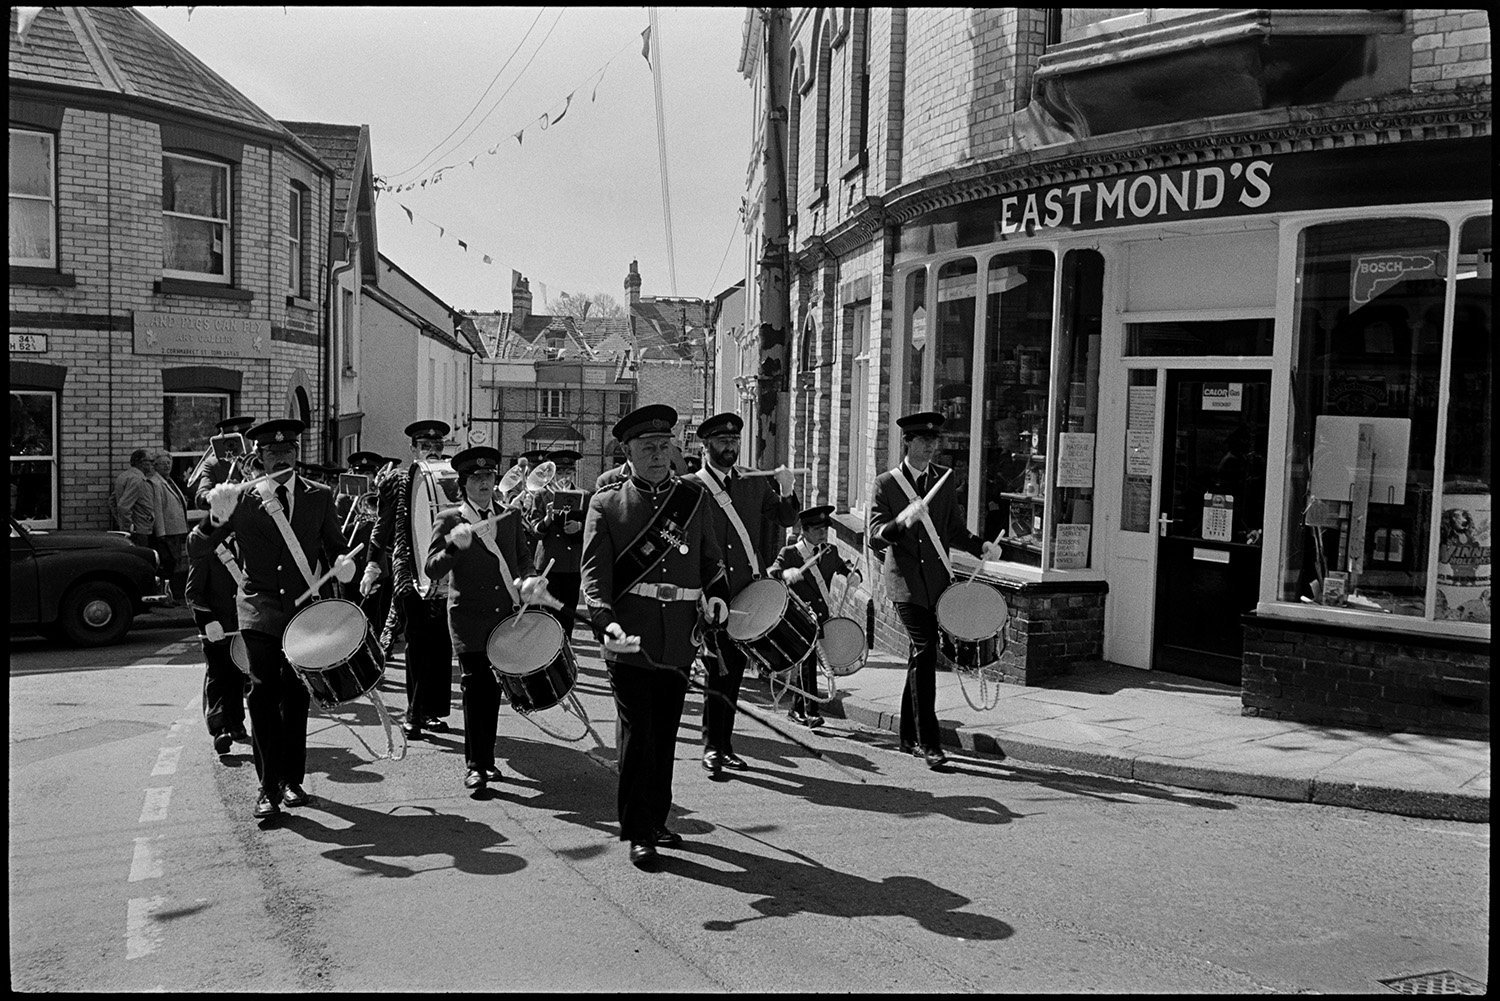 May Fair. Dancing with band marching, spectators and passers by. Maypole. 
[A marching band with drums and brass instruments parading past Eastmond's Hardware shop front at the Torrington May Fair. The street is decorated with bunting.]